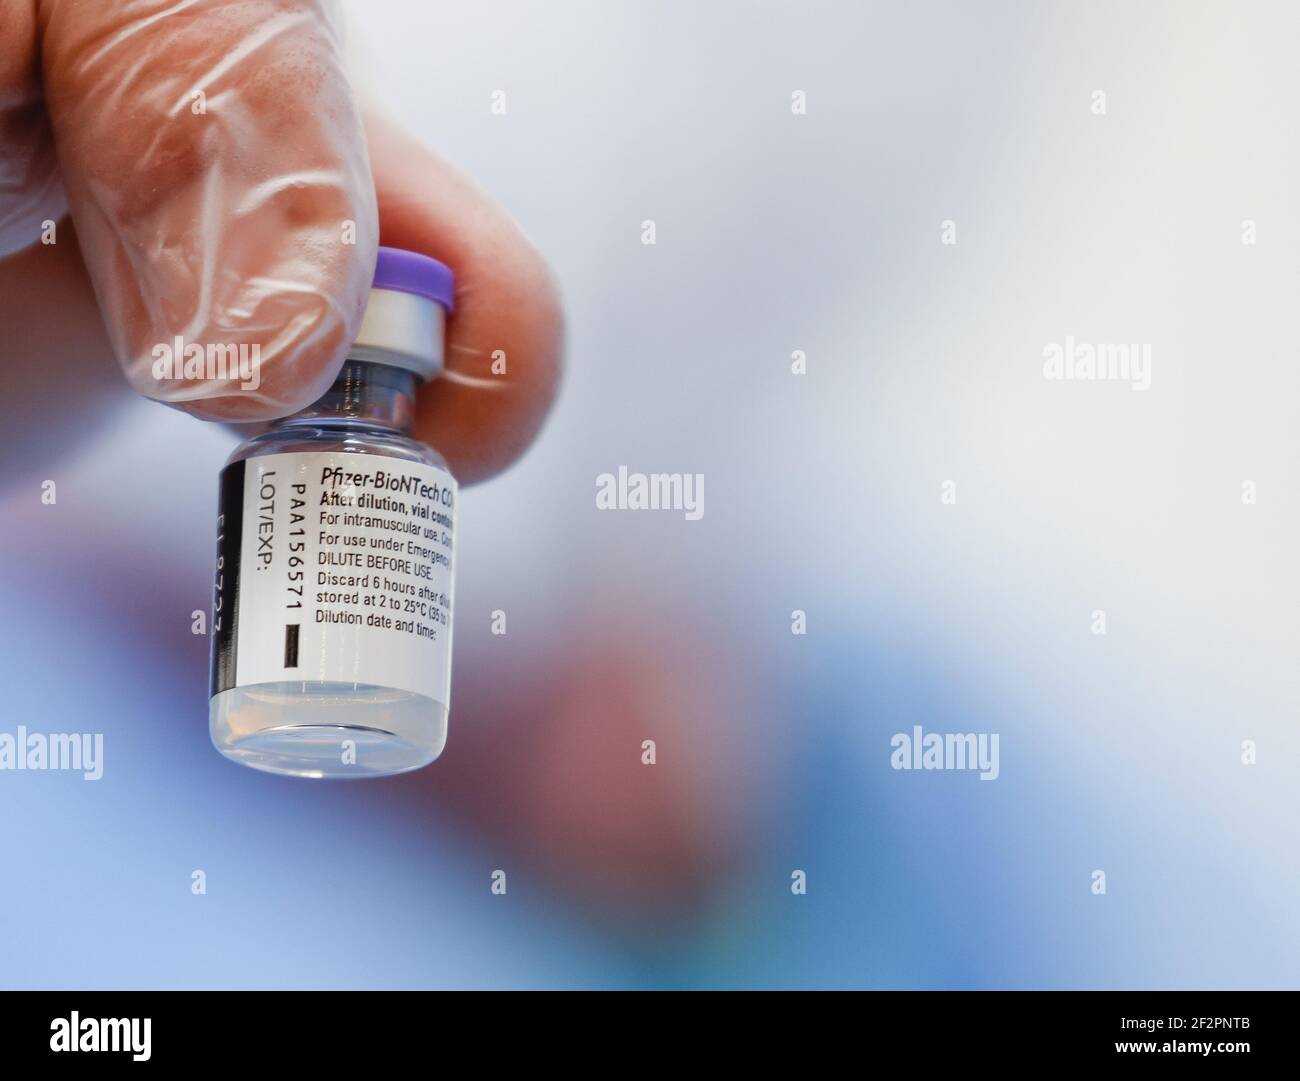 Essen, North Rhine-Westphalia, Germany - Vaccination start in the Corona Vaccination Center Essen, the vaccination syringes, BioNTech-Pfizer vaccine, 6 vaccination doses are drawn from an ampoule onto vaccination syringes. Stock Photo